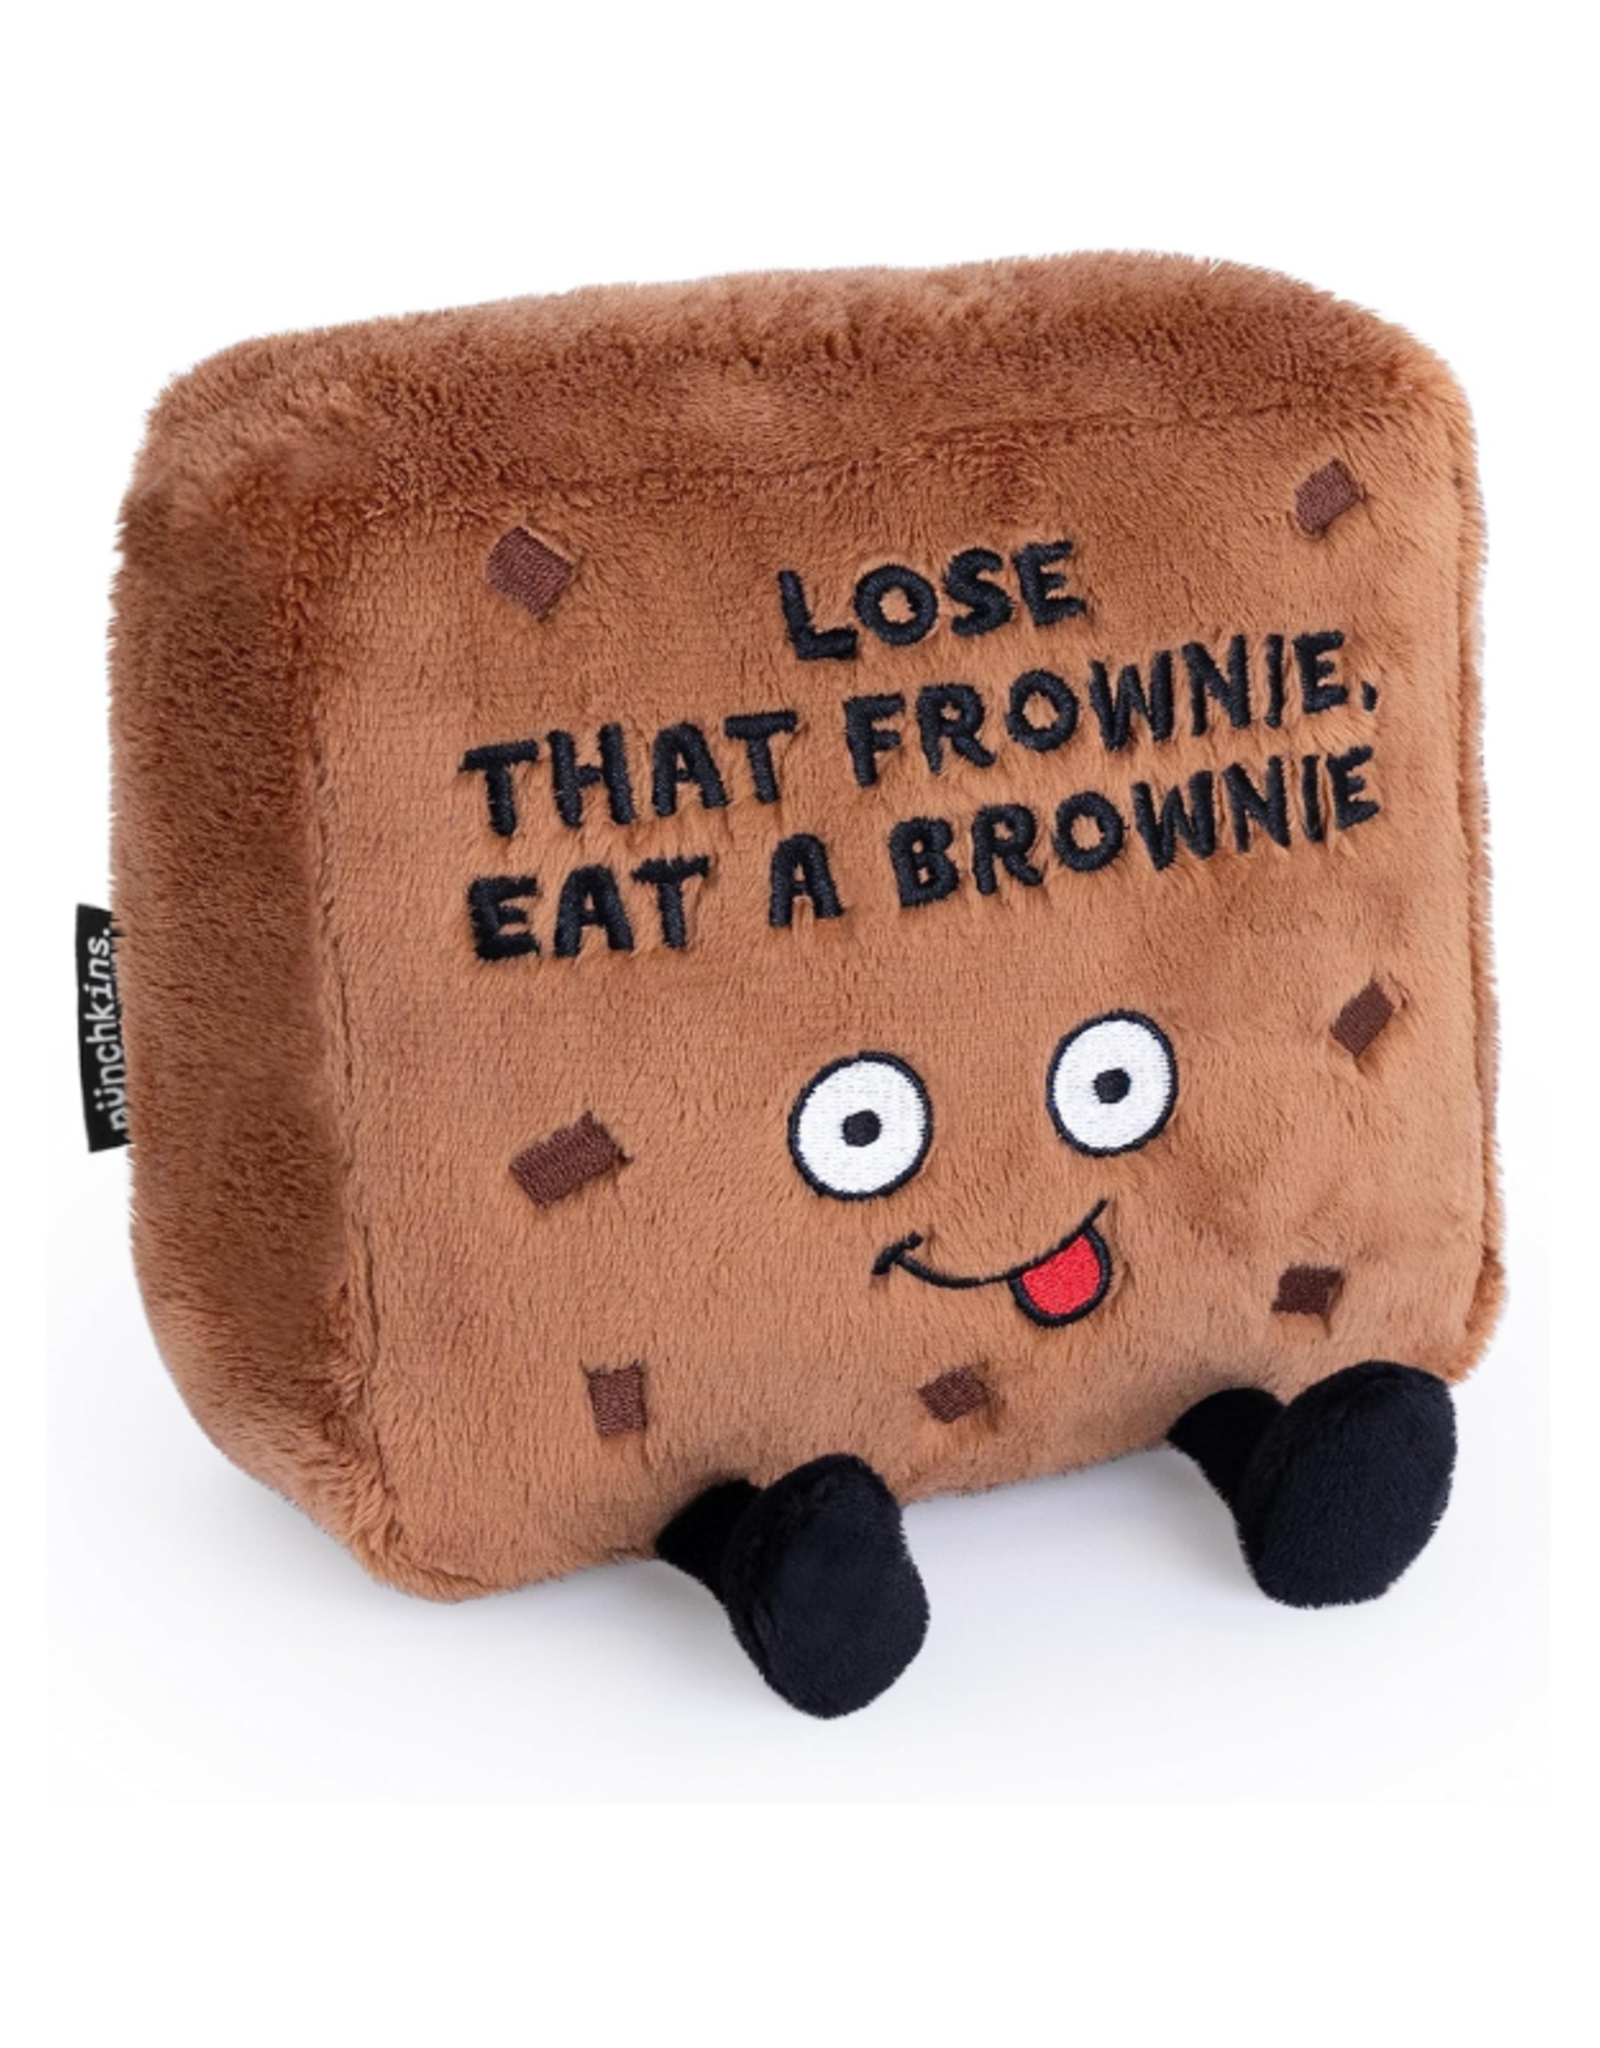 Punchkins Brownie - Lose That Frownie